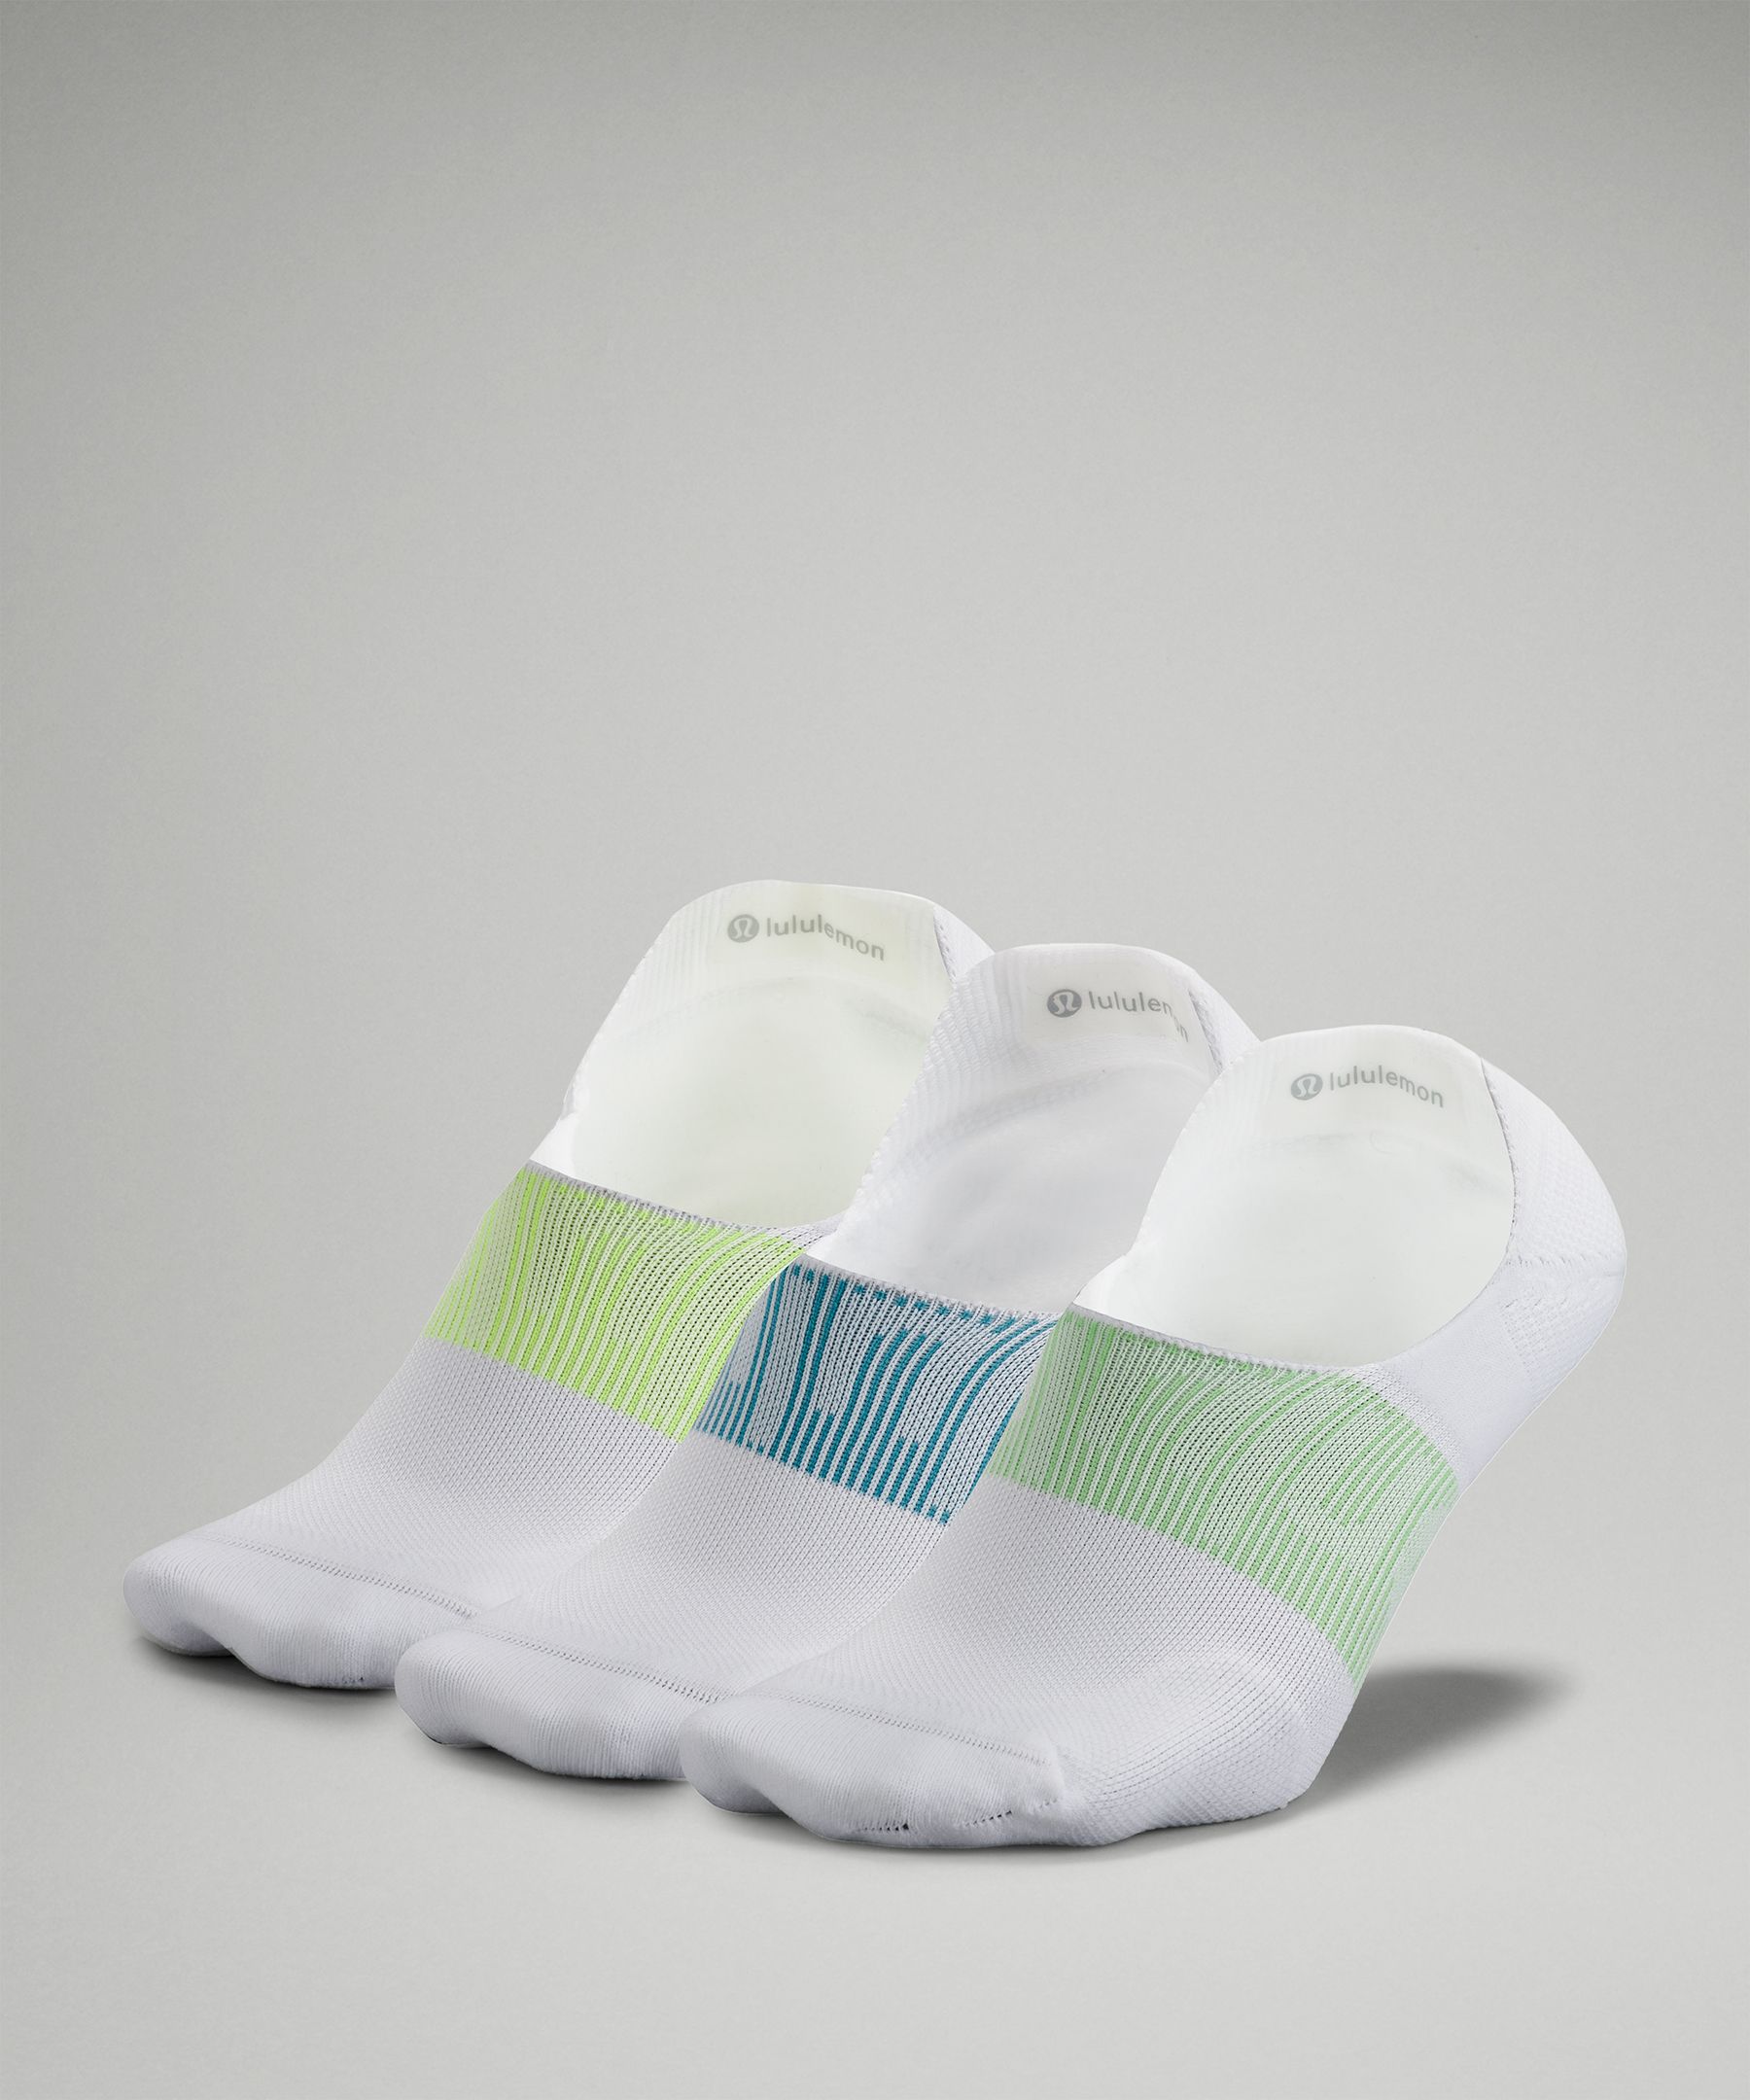 Lululemon Power Stride No-show Socks With Active Grip 3 Pack In White/crest/highlight Yellow